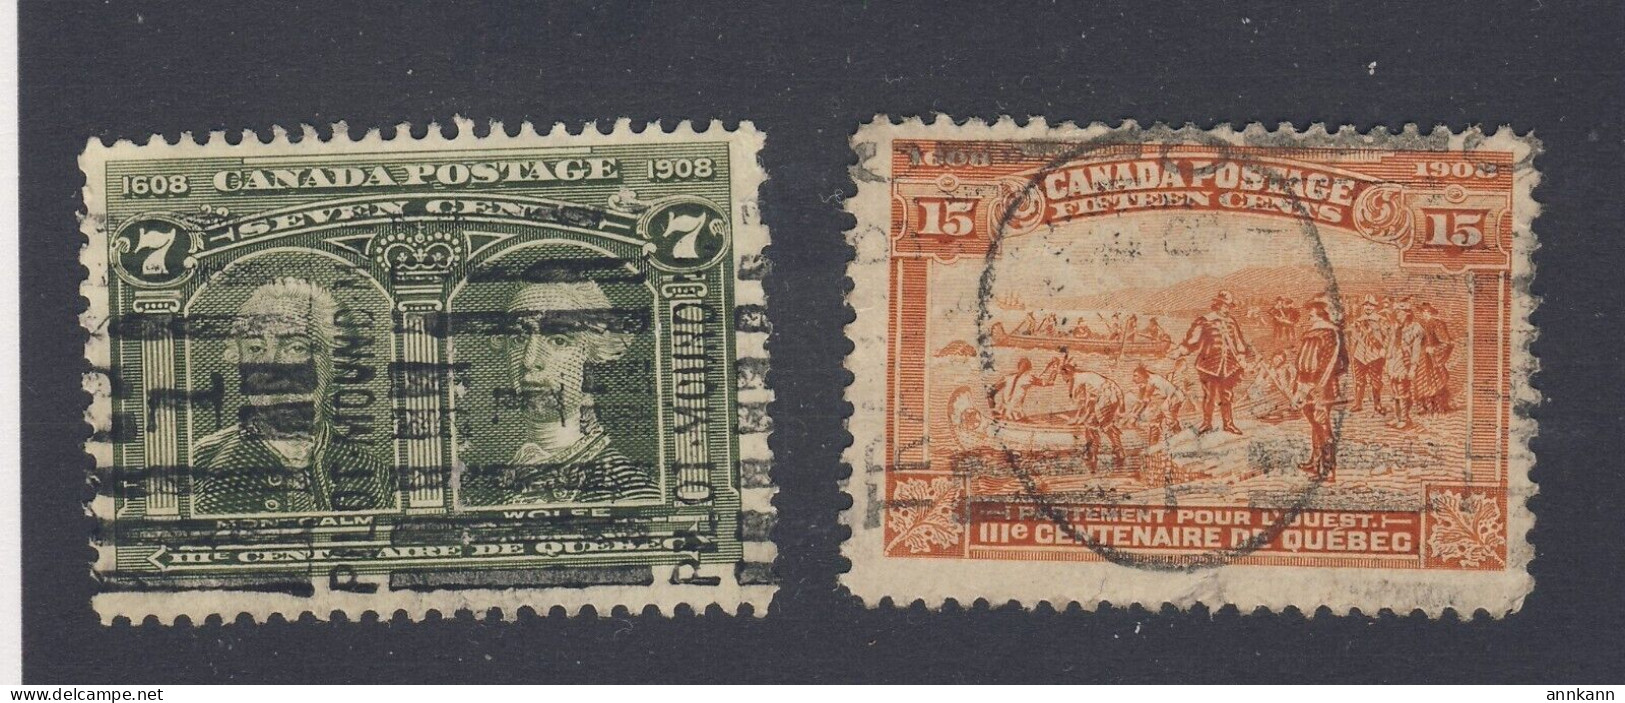 2x Canada 1908 Quebec Used Stamps #100-7c #102-15c SON Guide Value = $150.00 - Used Stamps